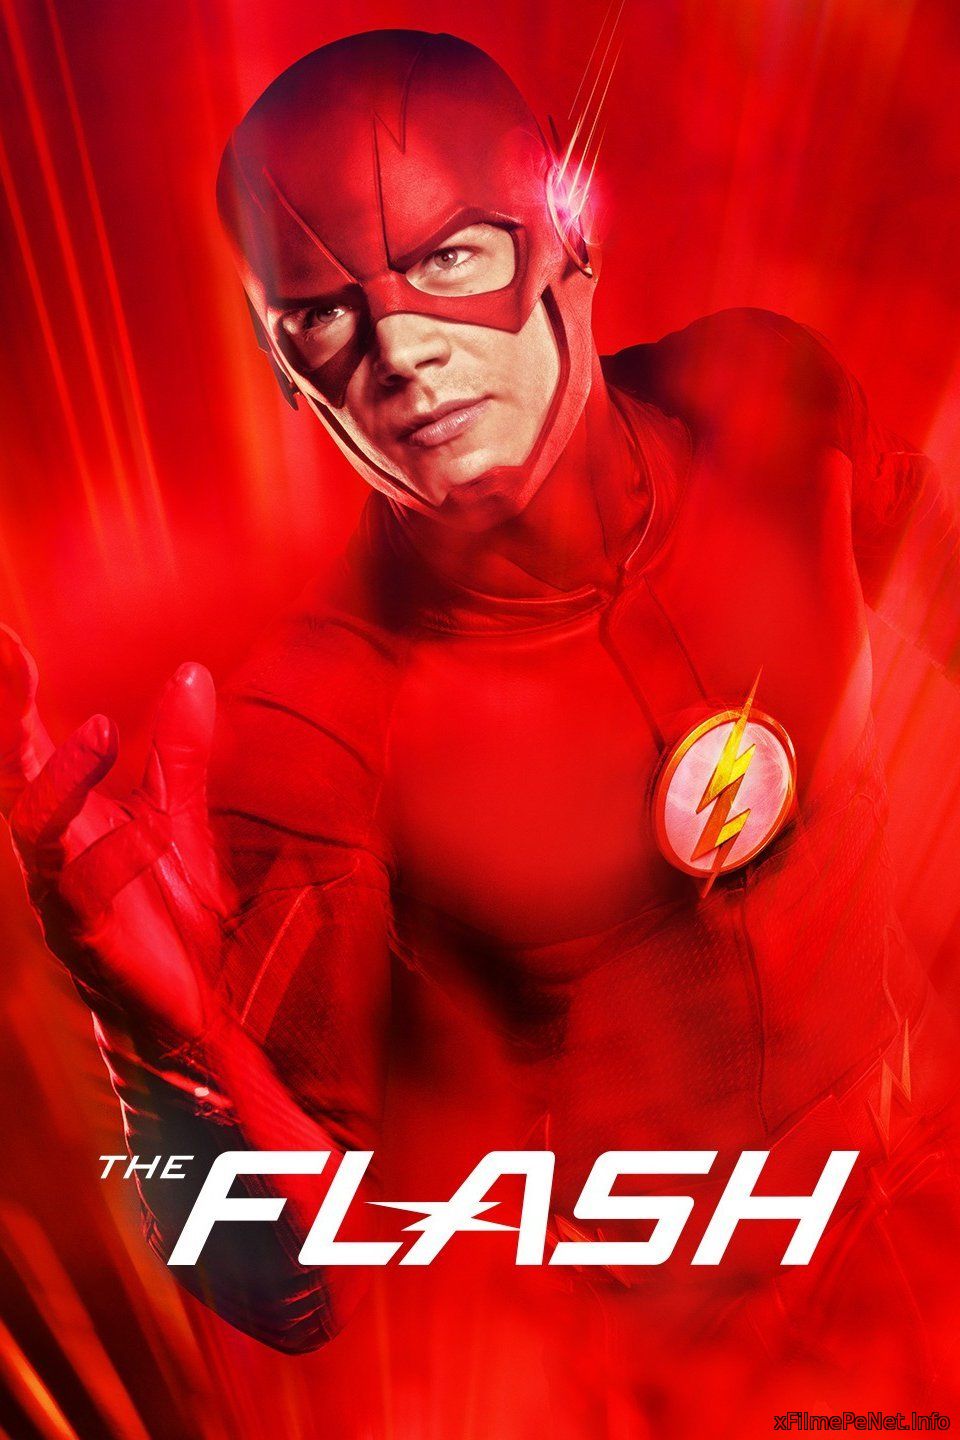 The Flash Sezon 02 Episod 19 - Back to Normal